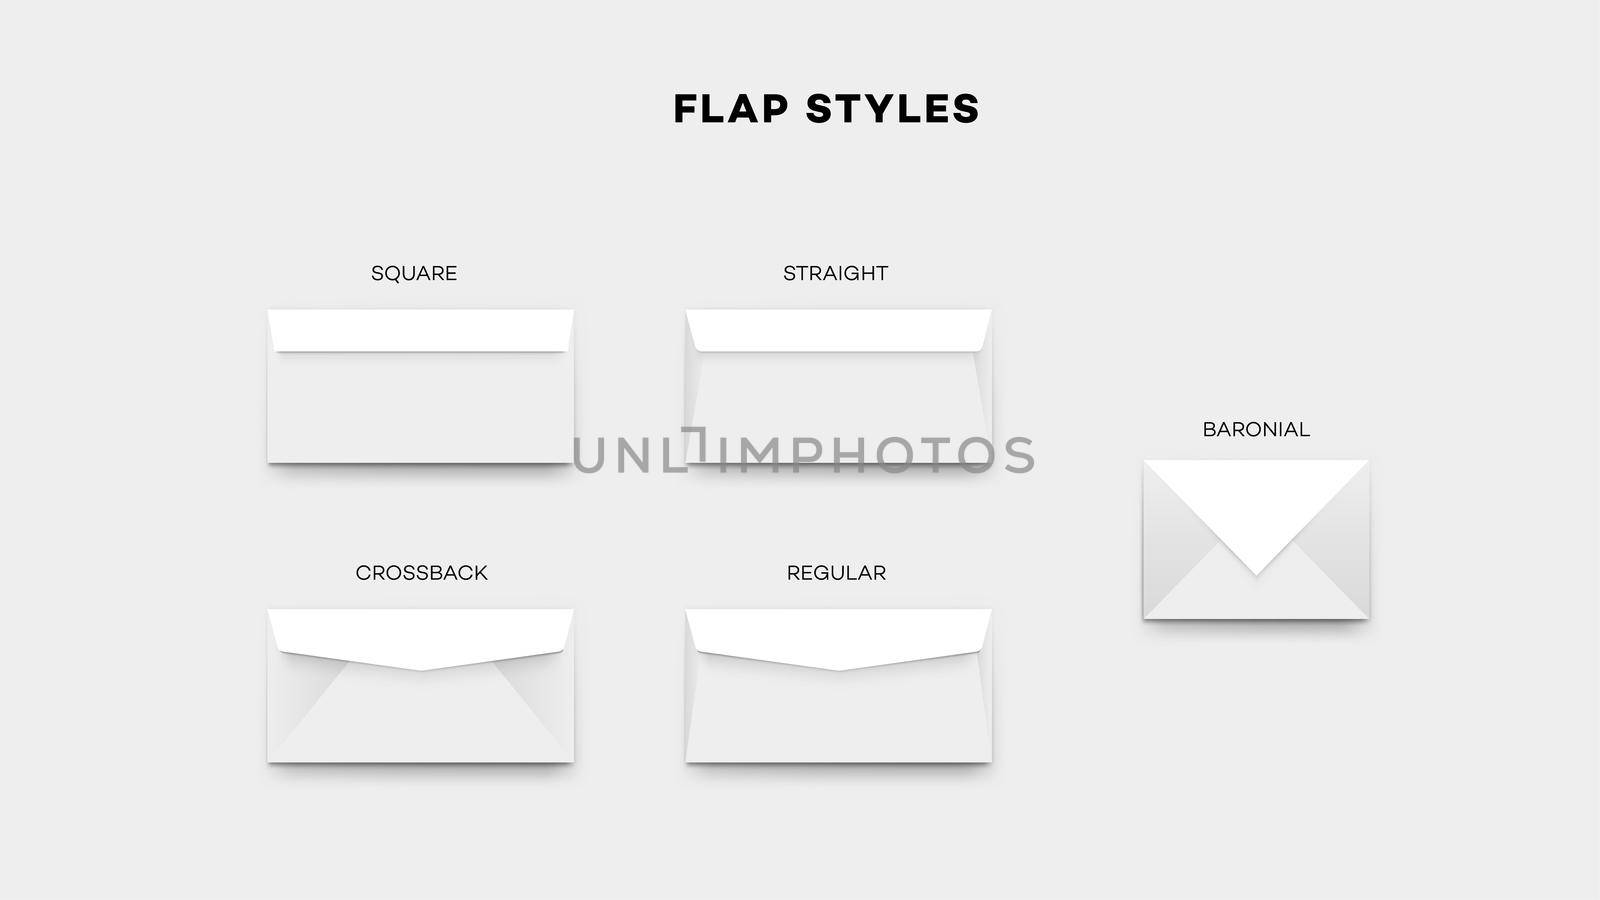 Most Envelope Flap Styles. Square, Sraight, Crossback, Regular And Baronial Vector Temlate